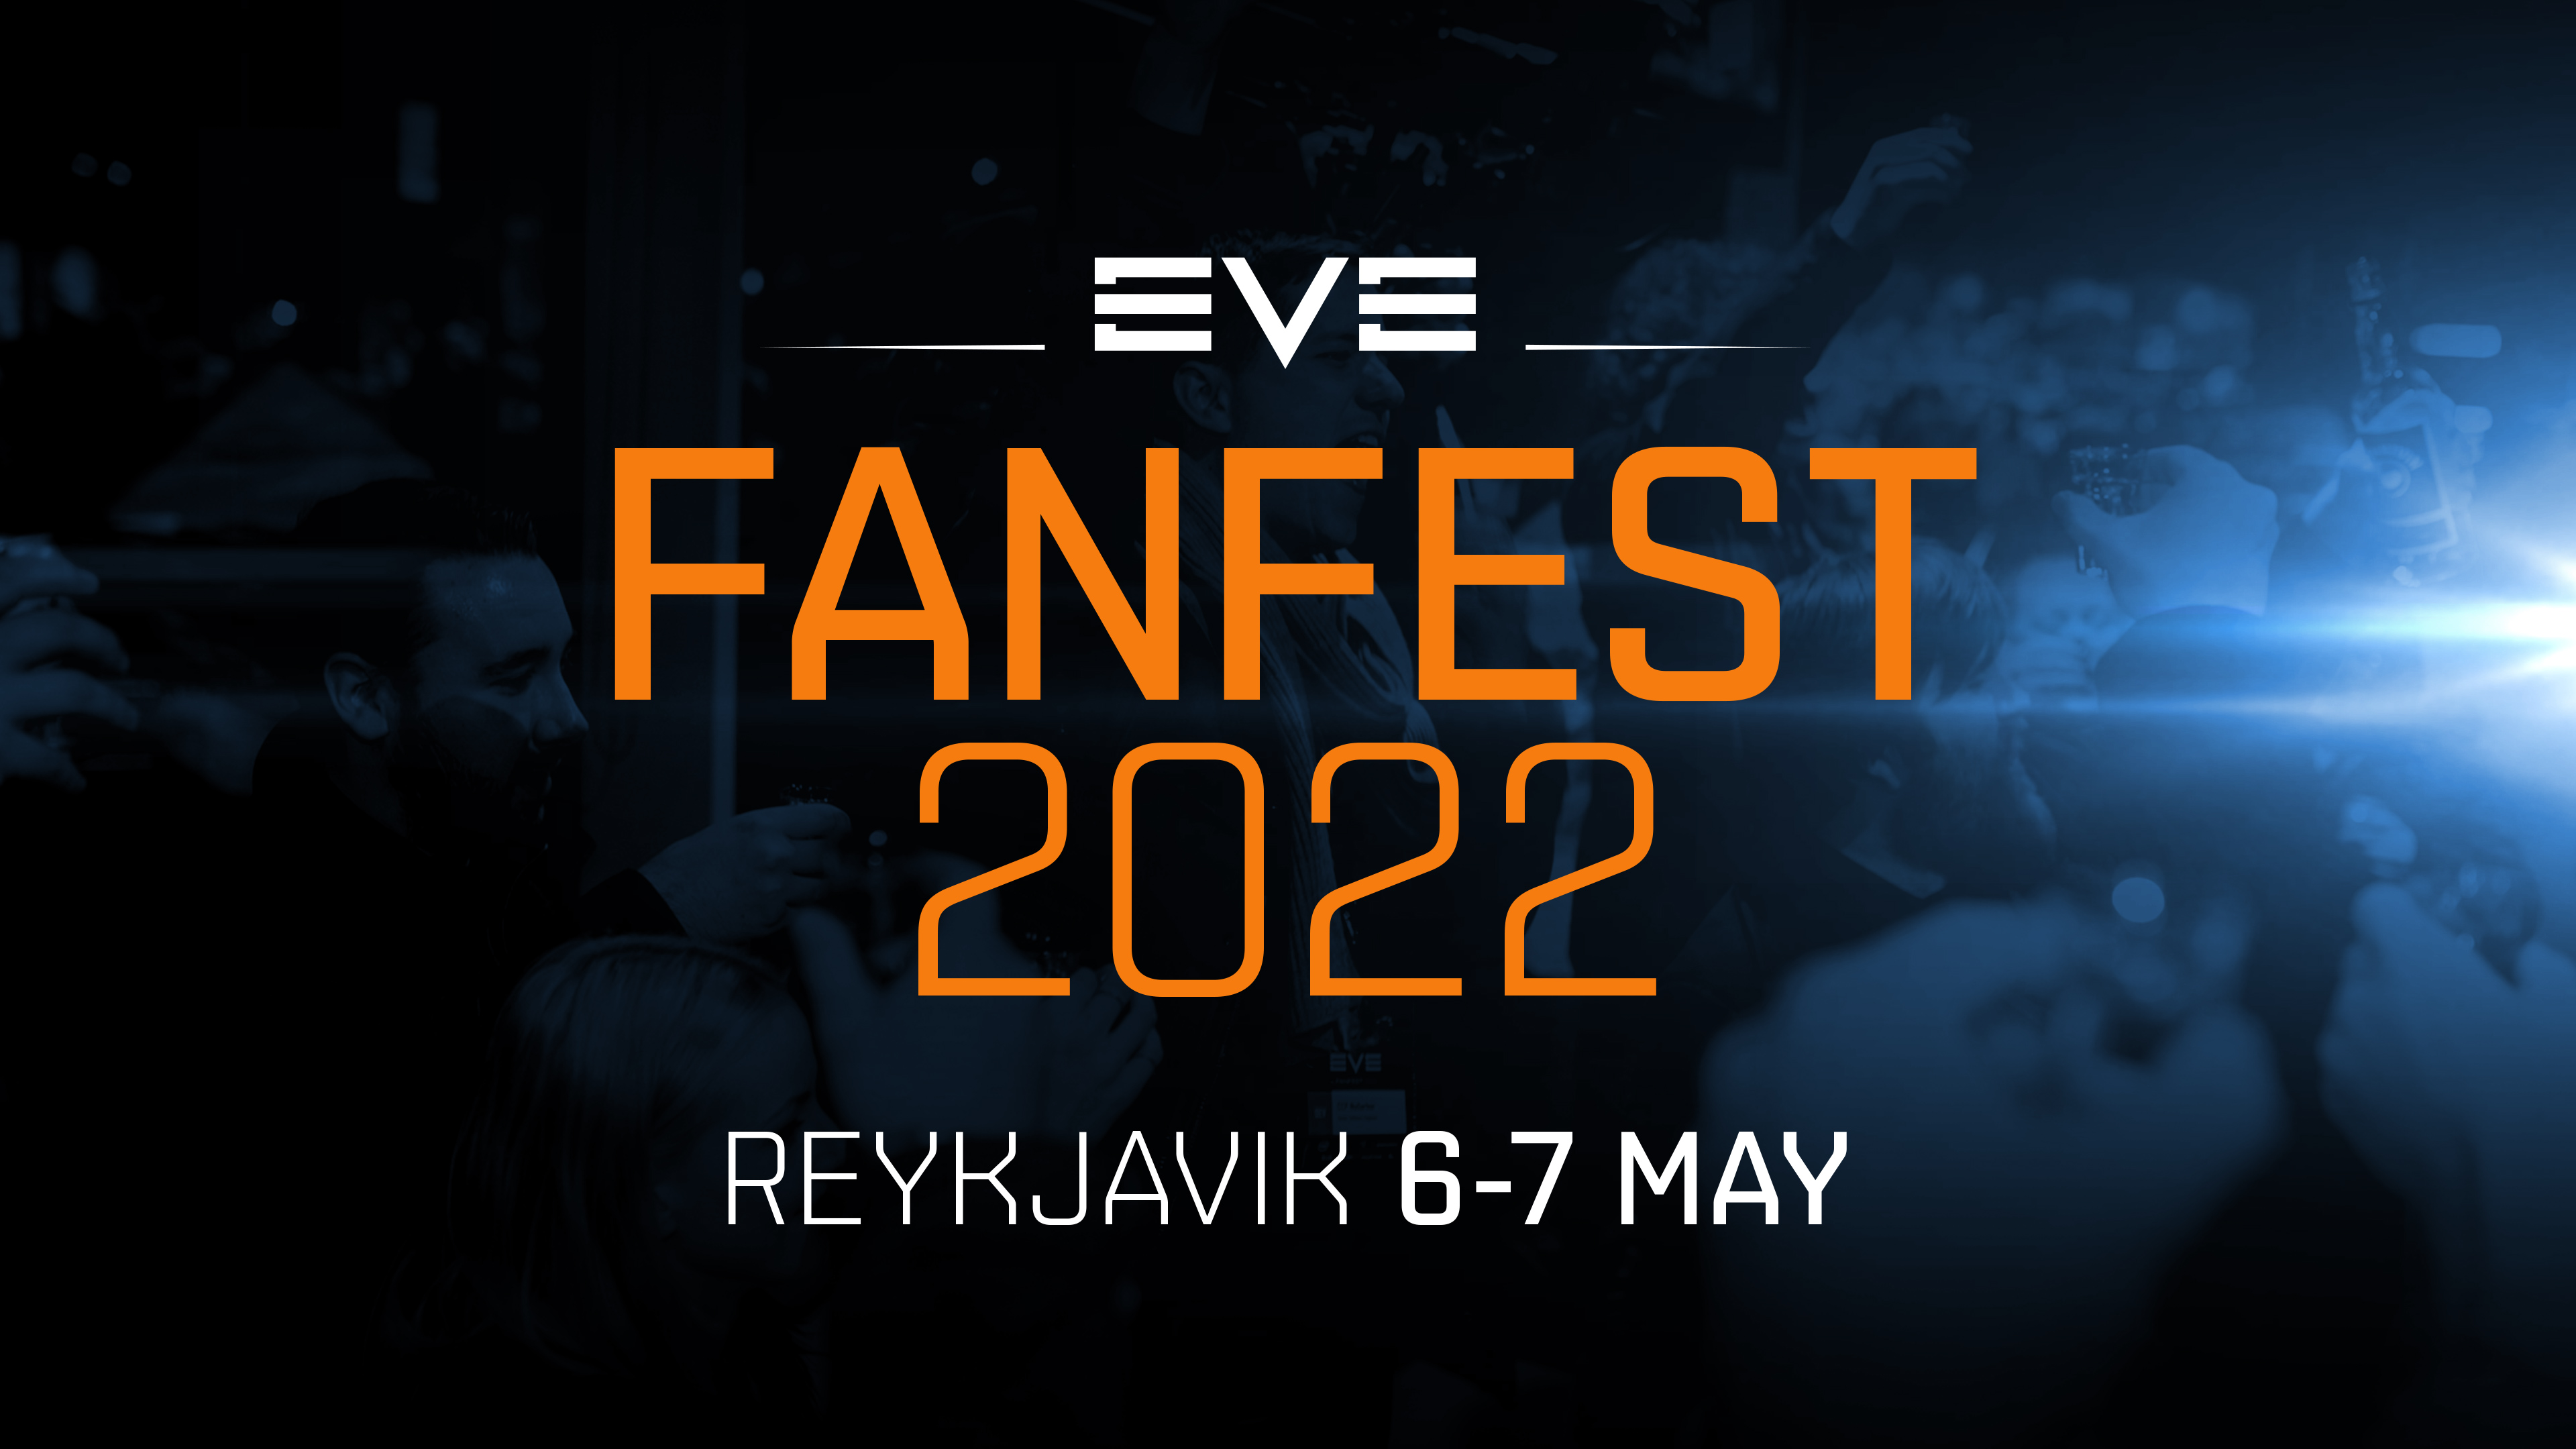 EVE Online 2022 Update - Road to Fanfest